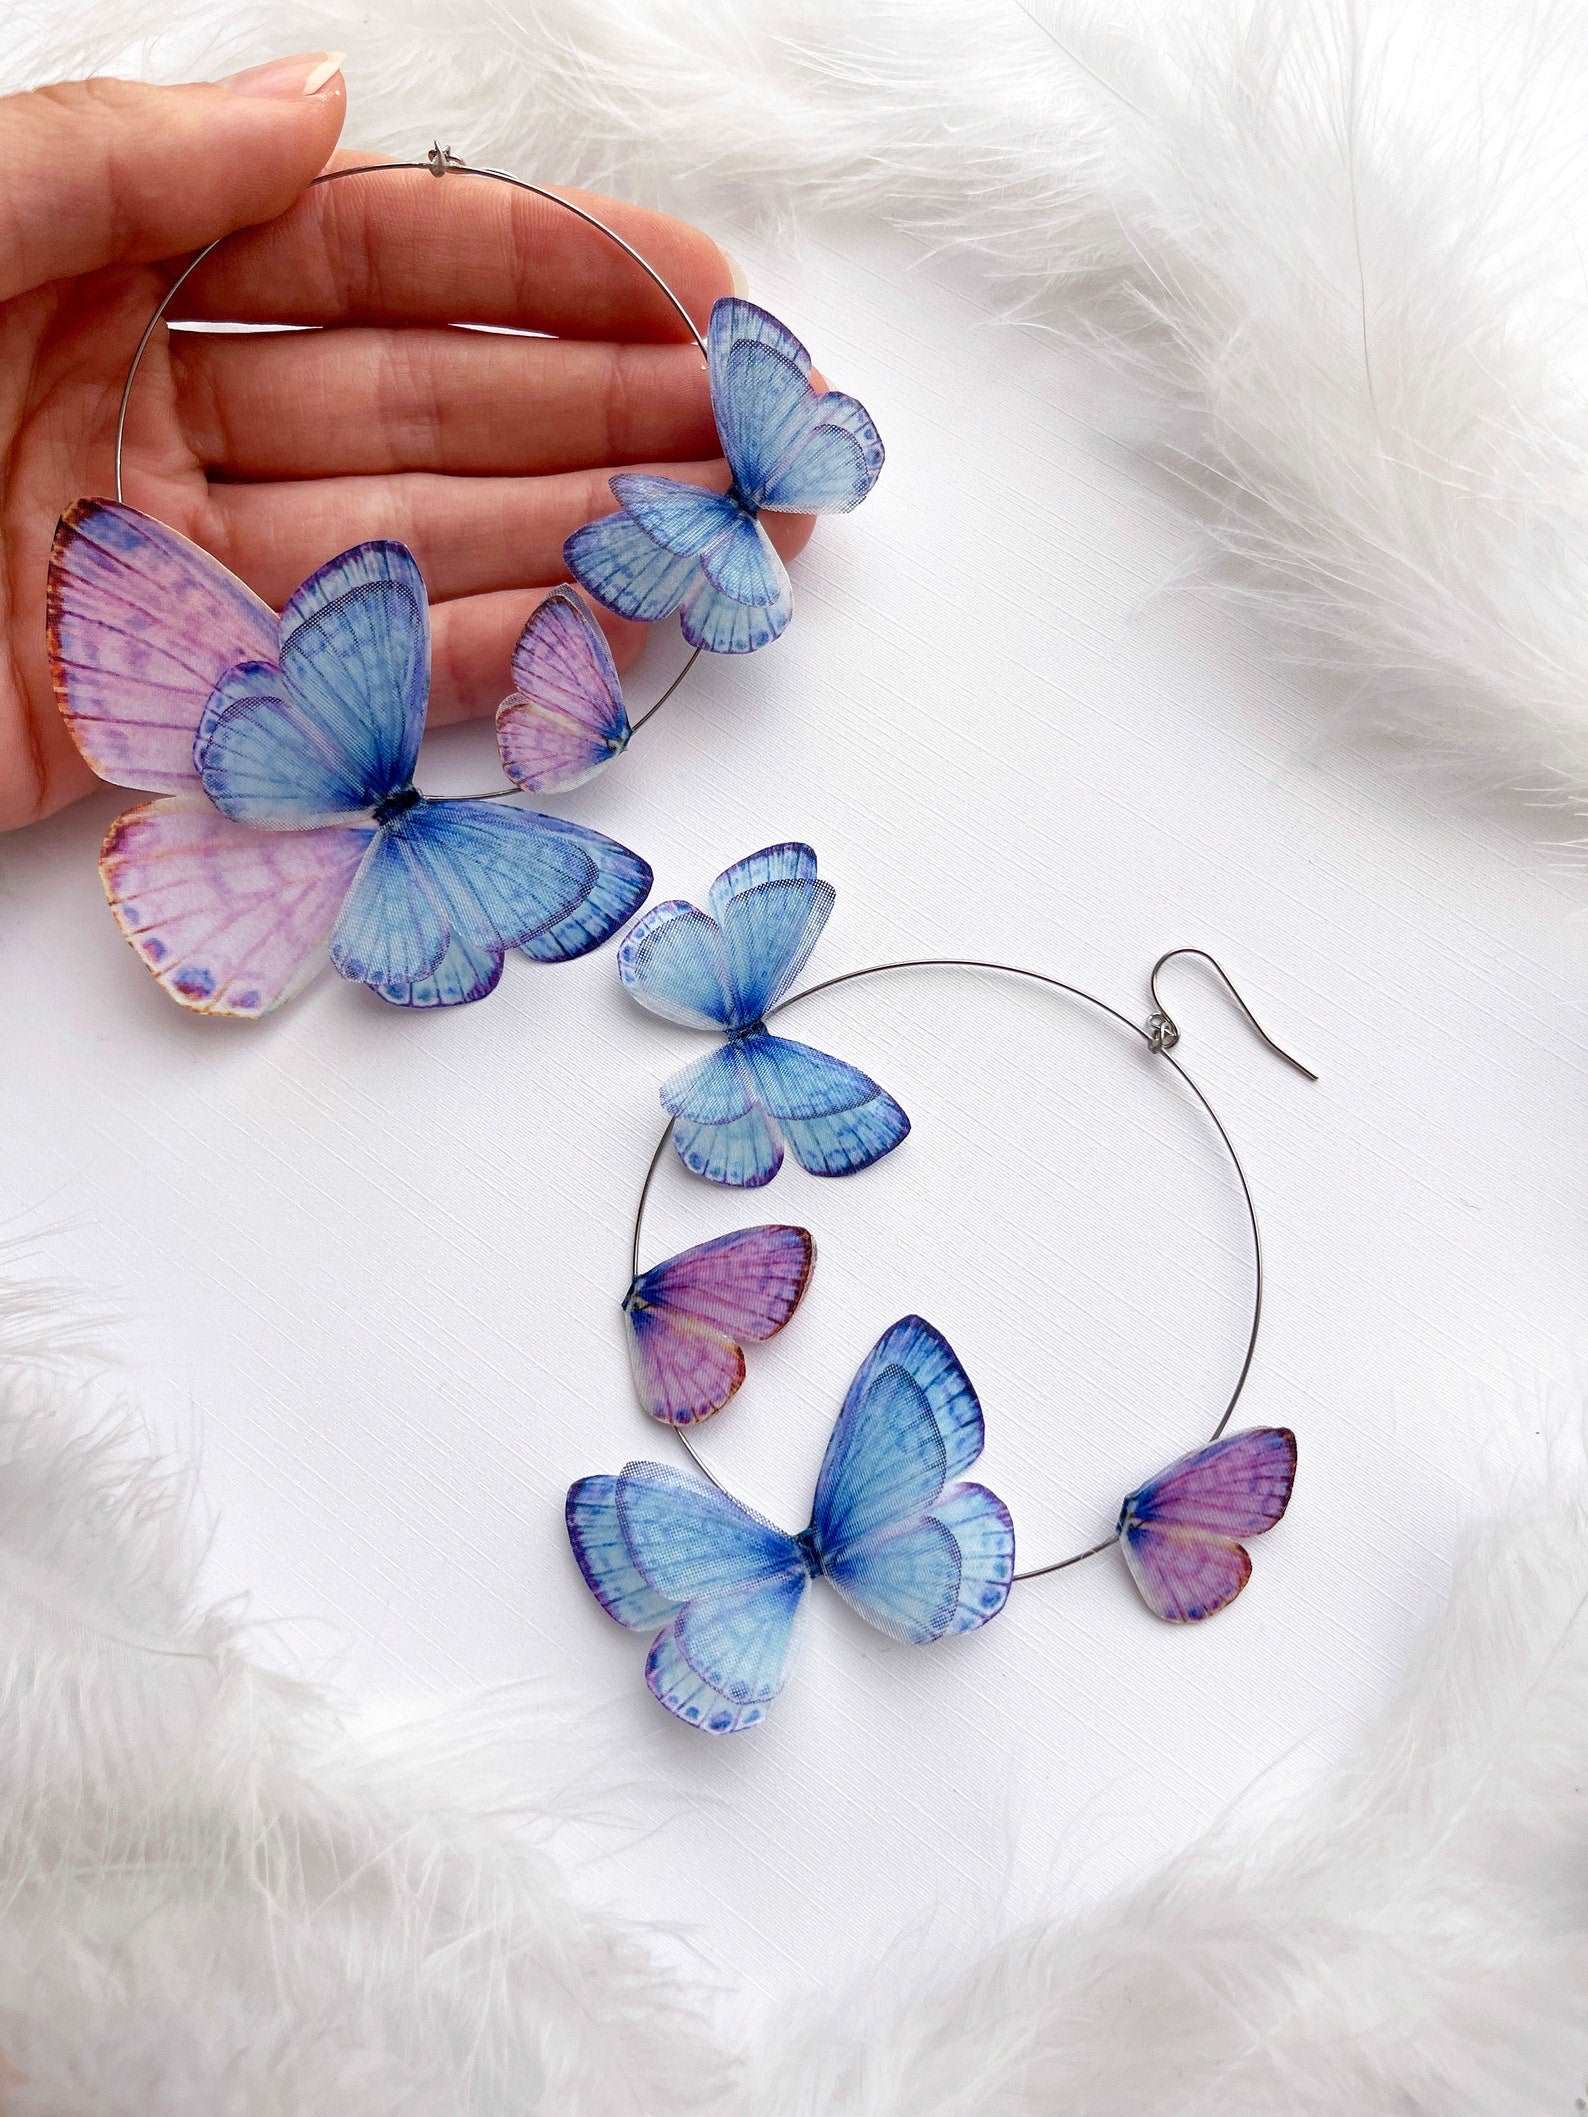 Handmade Aesthetic Earrings with Faux Butterflies on White Background